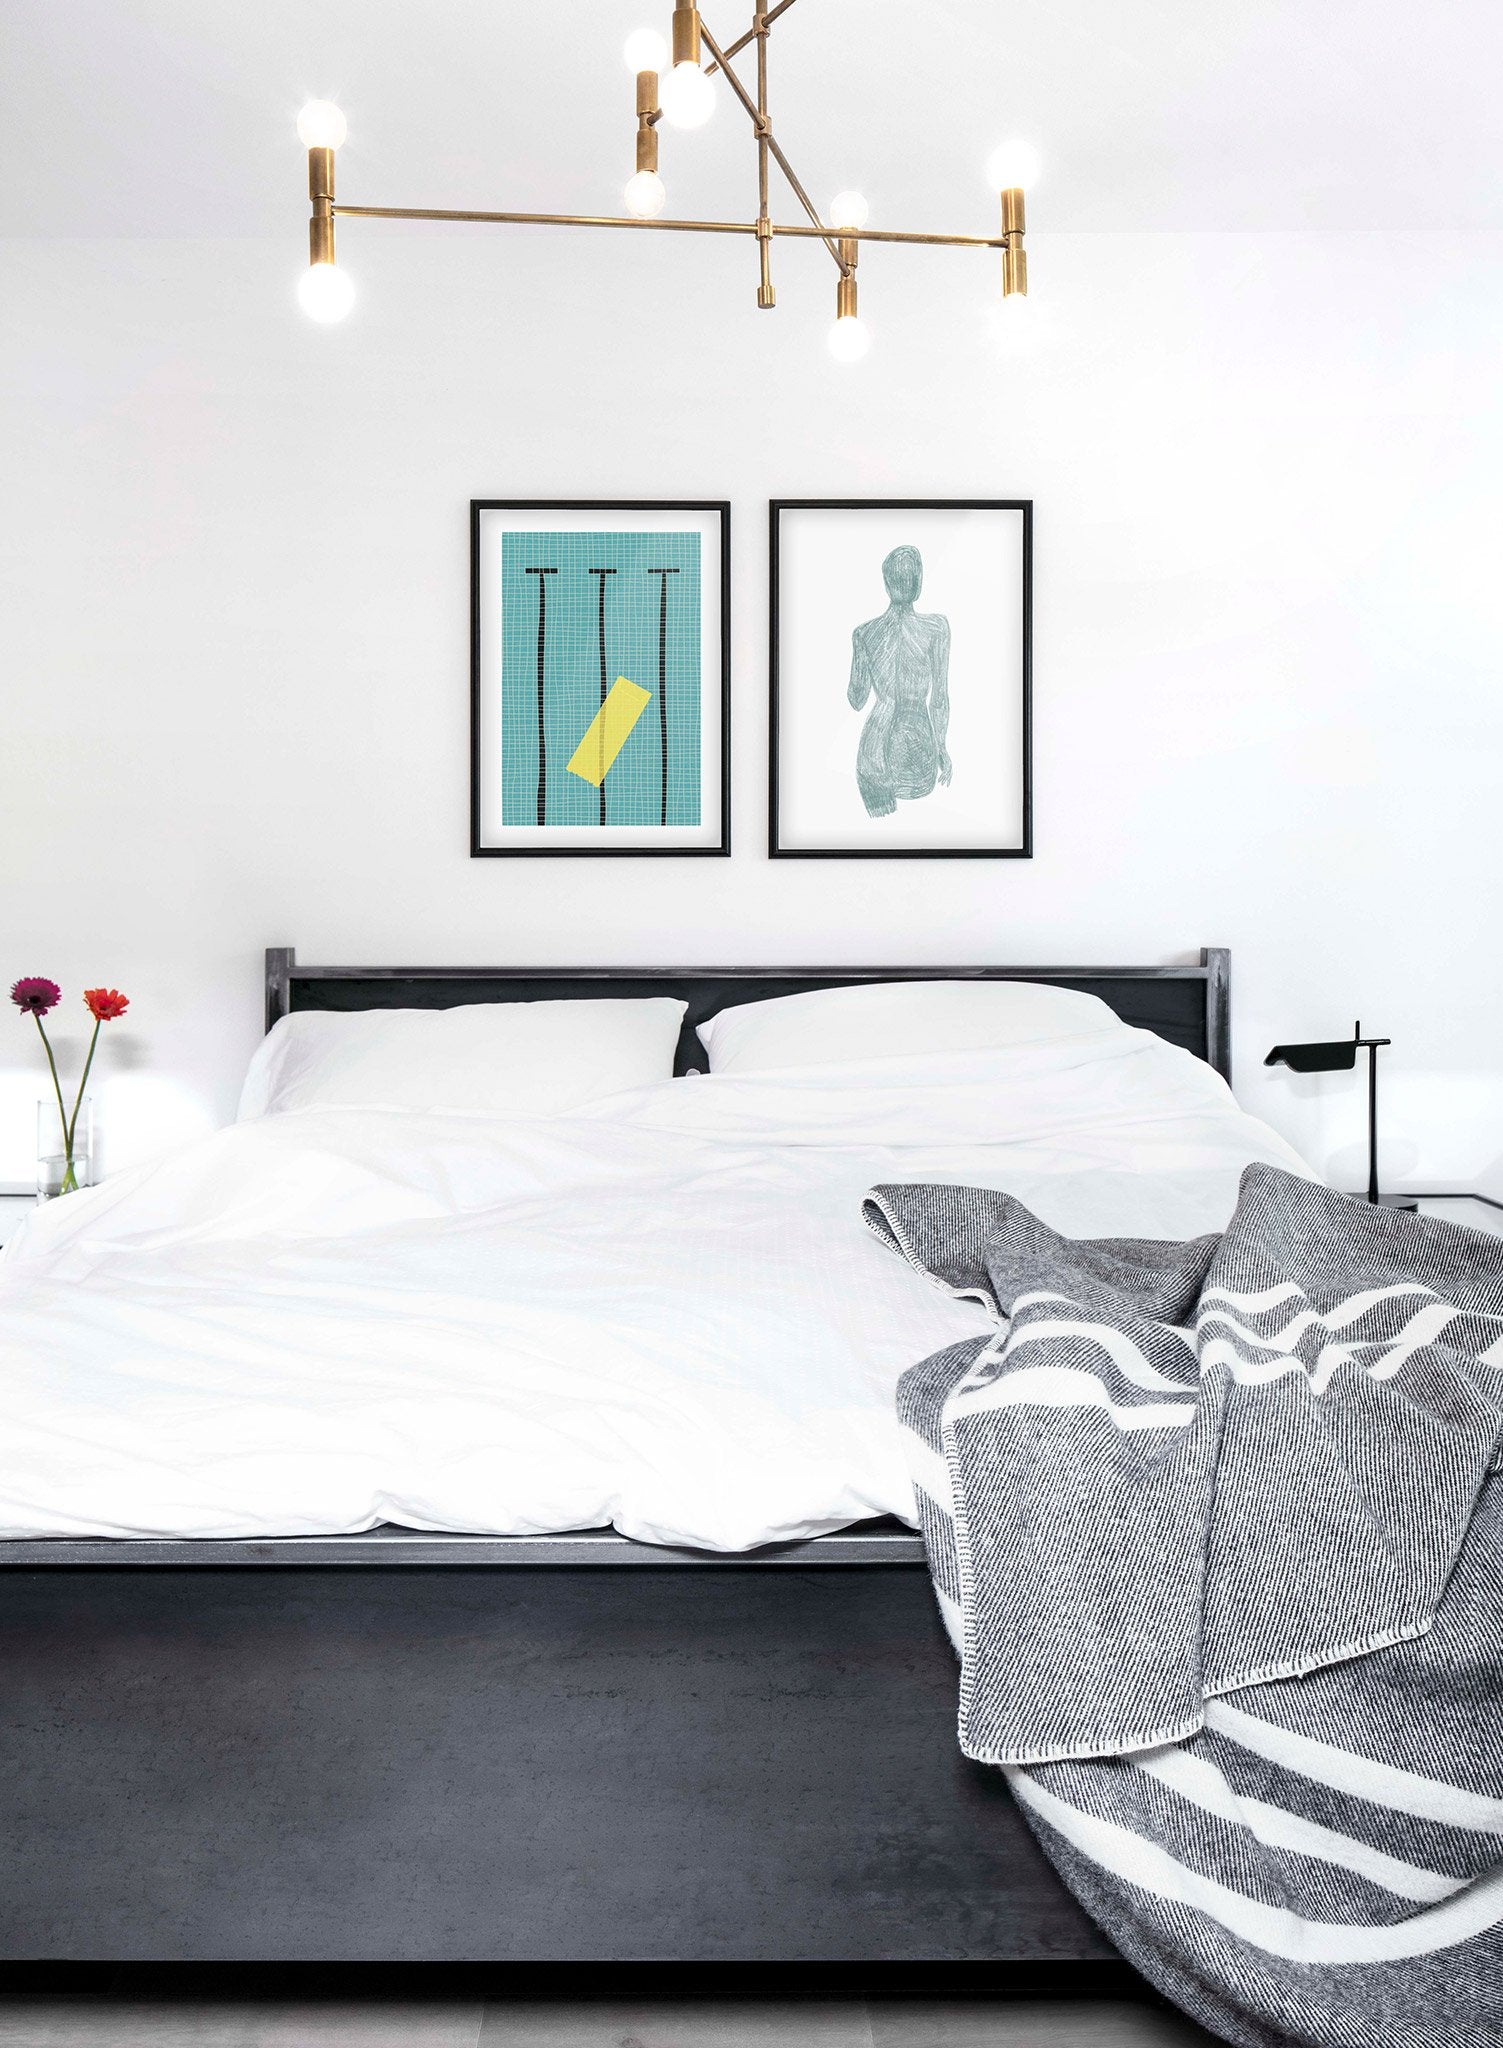 Minimalist pop art paper illustration by German artist Rosi Feist with pool from bird's eye view - Lifestyle Duo - Bedroom